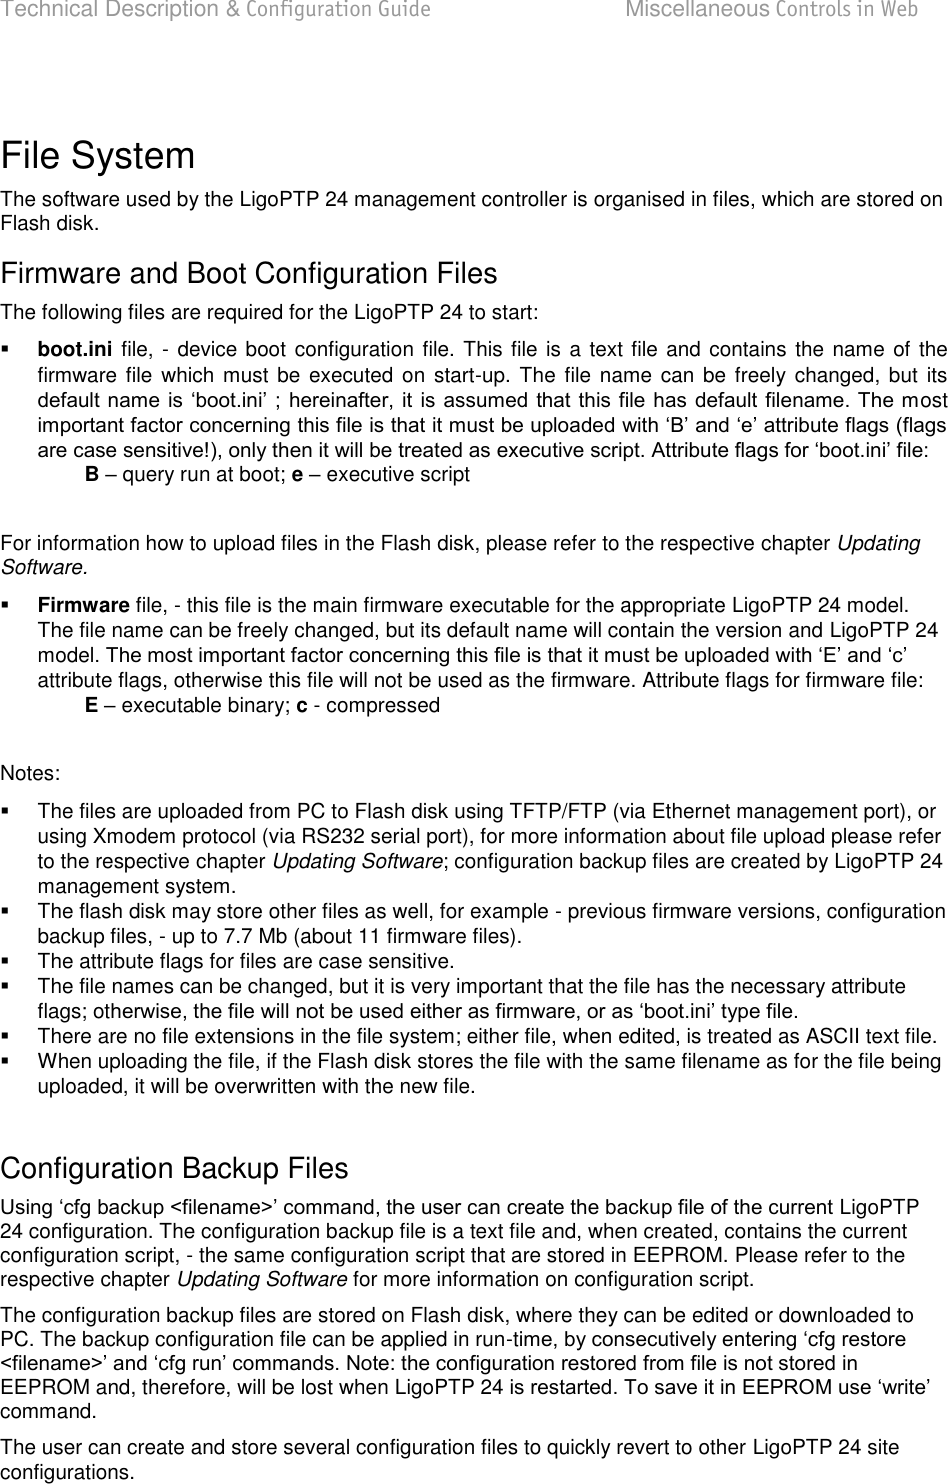 Technical Description &amp; Configuration Guide  Miscellaneous Controls in Web  LigoWave  Page 78  File System  The software used by the LigoPTP 24 management controller is organised in files, which are stored on Flash disk.  Firmware and Boot Configuration Files  The following files are required for the LigoPTP 24 to start:   boot.ini file, - device boot configuration file. This file is a text file and contains the name of the firmware file  which must be executed  on  start-up. The file name can  be freely changed,  but  its             ost  B  query run at boot; e  executive script   For information how to upload files in the Flash disk, please refer to the respective chapter Updating Software.   Firmware file, - this file is the main firmware executable for the appropriate LigoPTP 24 model. The file name can be freely changed, but its default name will contain the version and LigoPTP 24 modelattribute flags, otherwise this file will not be used as the firmware. Attribute flags for firmware file:  E  executable binary; c - compressed   Notes:    The files are uploaded from PC to Flash disk using TFTP/FTP (via Ethernet management port), or using Xmodem protocol (via RS232 serial port), for more information about file upload please refer to the respective chapter Updating Software; configuration backup files are created by LigoPTP 24 management system.    The flash disk may store other files as well, for example - previous firmware versions, configuration backup files, - up to 7.7 Mb (about 11 firmware files).    The attribute flags for files are case sensitive.    The file names can be changed, but it is very important that the file has the necessary attribute flags; ot   There are no file extensions in the file system; either file, when edited, is treated as ASCII text file.    When uploading the file, if the Flash disk stores the file with the same filename as for the file being uploaded, it will be overwritten with the new file.   Configuration Backup Files  LigoPTP 24 configuration. The configuration backup file is a text file and, when created, contains the current configuration script, - the same configuration script that are stored in EEPROM. Please refer to the respective chapter Updating Software for more information on configuration script.  The configuration backup files are stored on Flash disk, where they can be edited or downloaded to PC. The backup configuration file can be applied in run-tEEPROM and, therefore, will be lost when LigoPTP 24 command.  The user can create and store several configuration files to quickly revert to other LigoPTP 24 site configurations.   